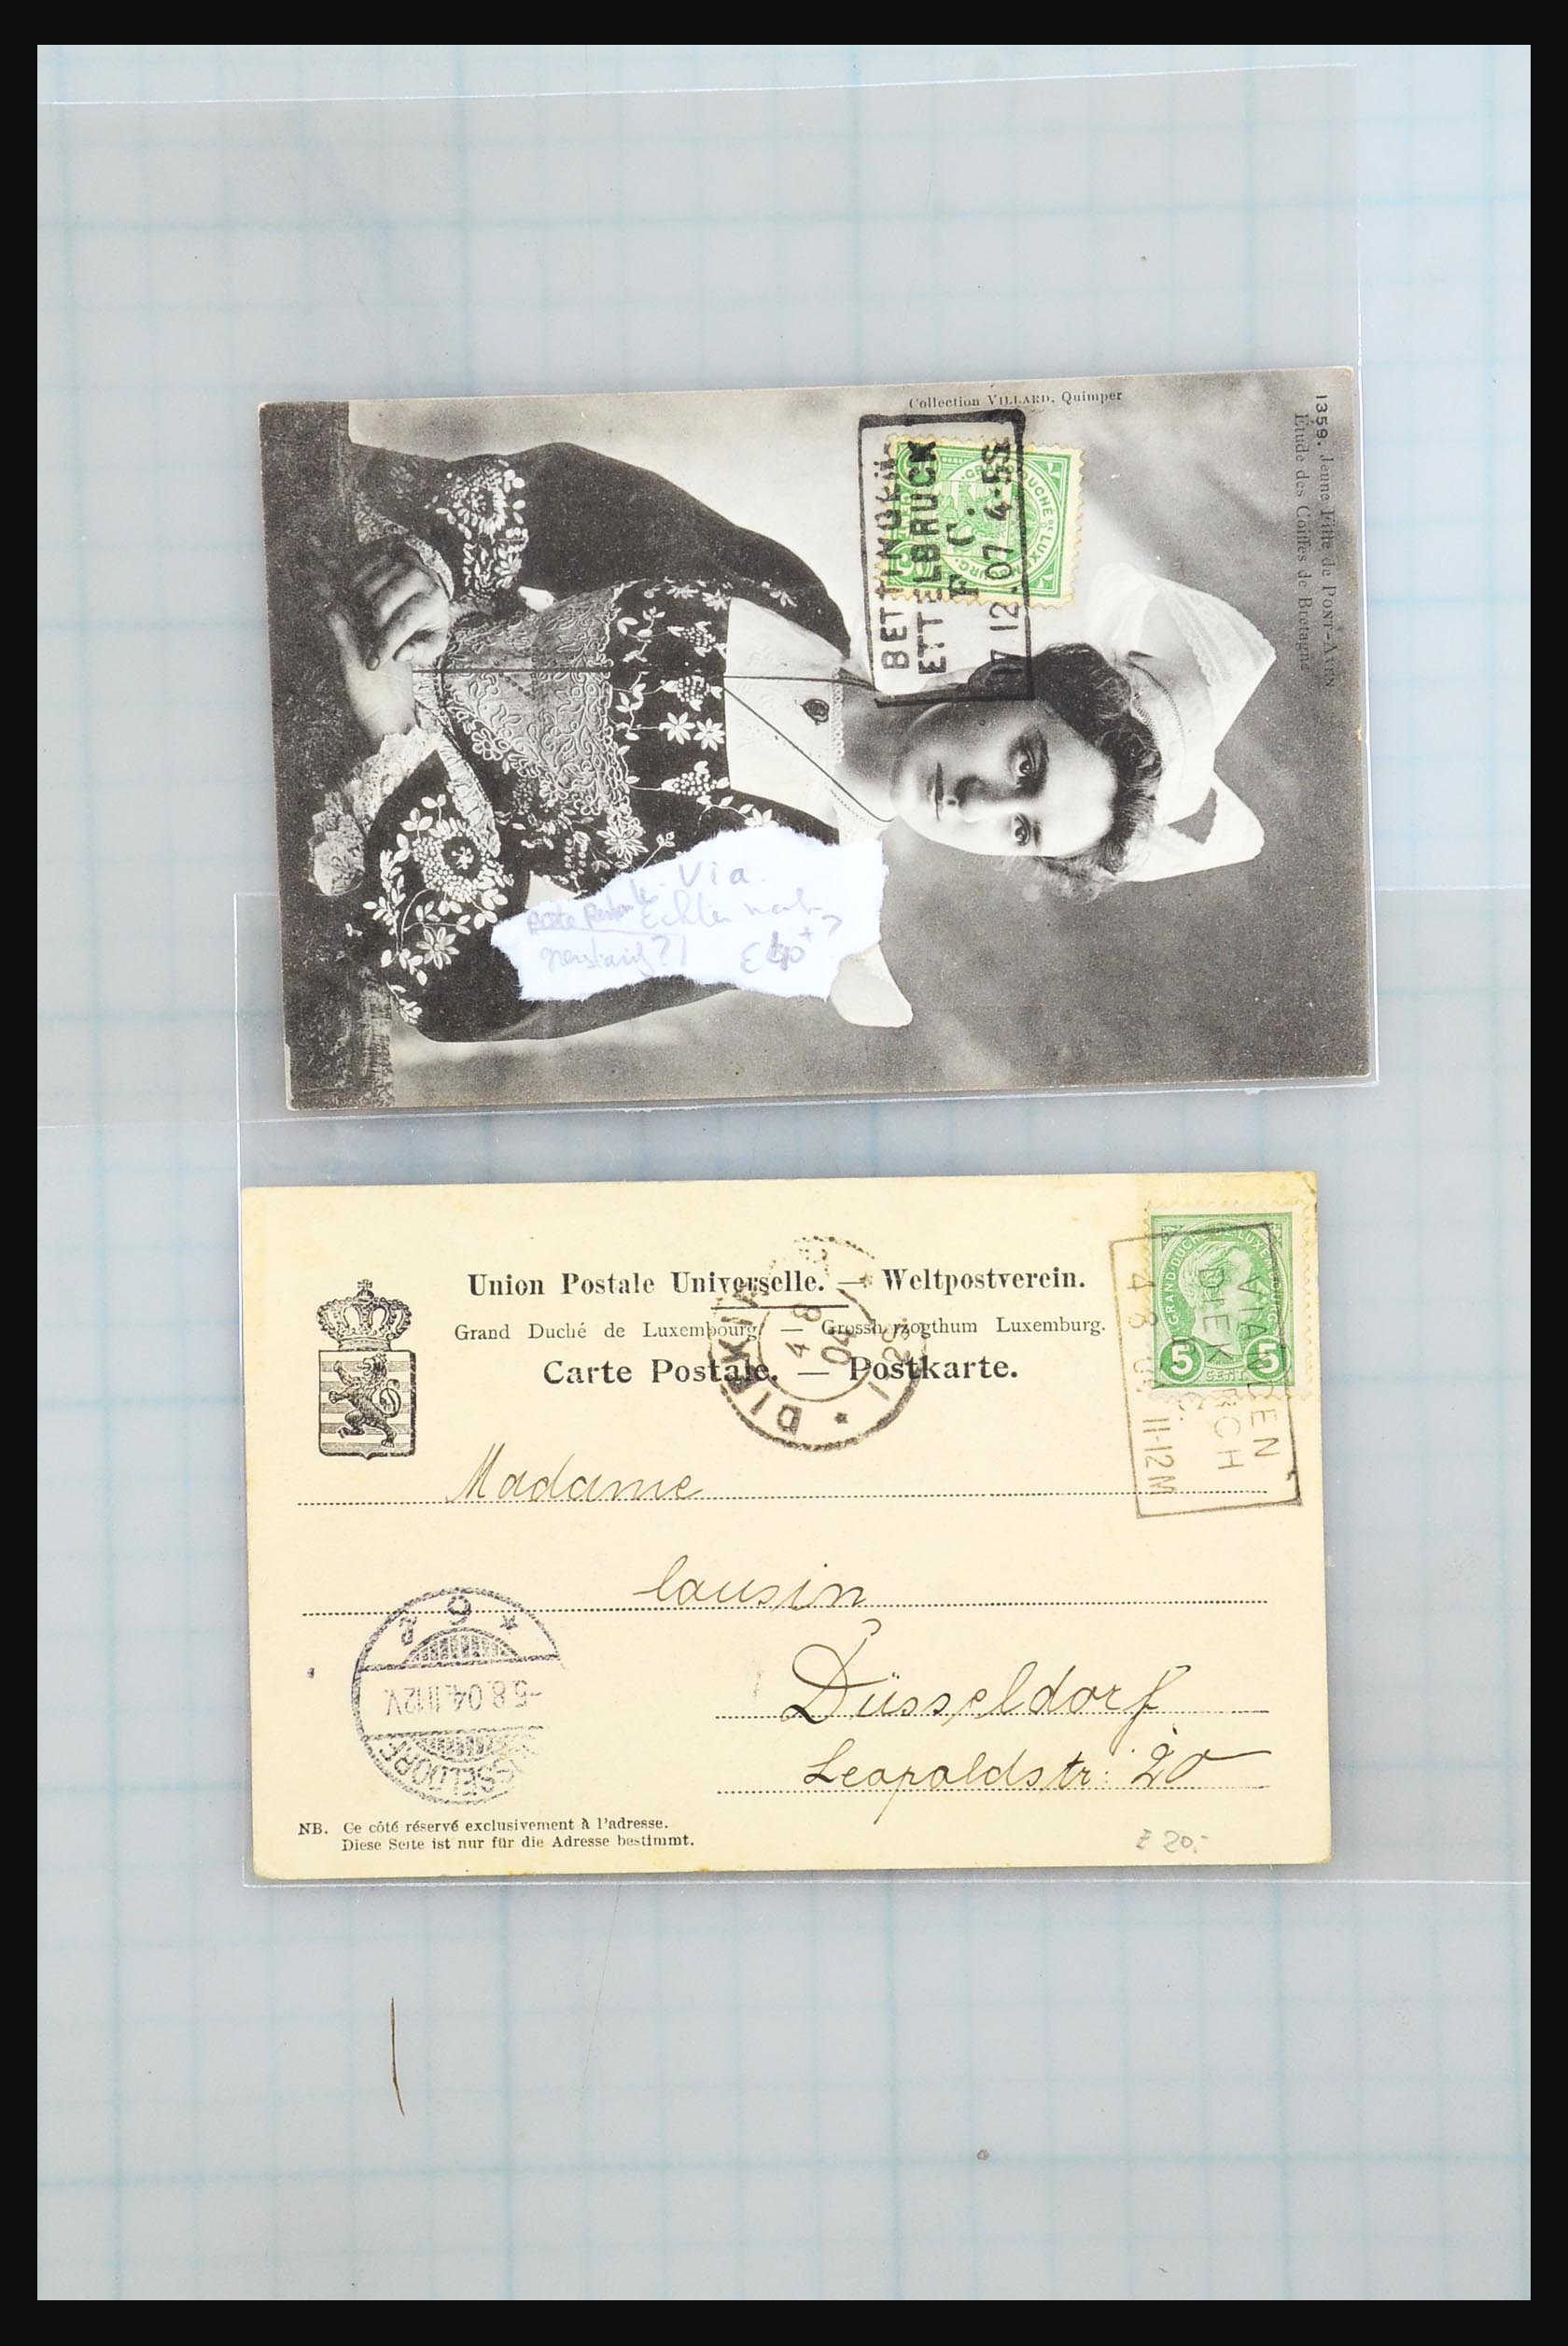 31358 081 - 31358 Portugal/Luxemburg/Greece covers 1880-1960.